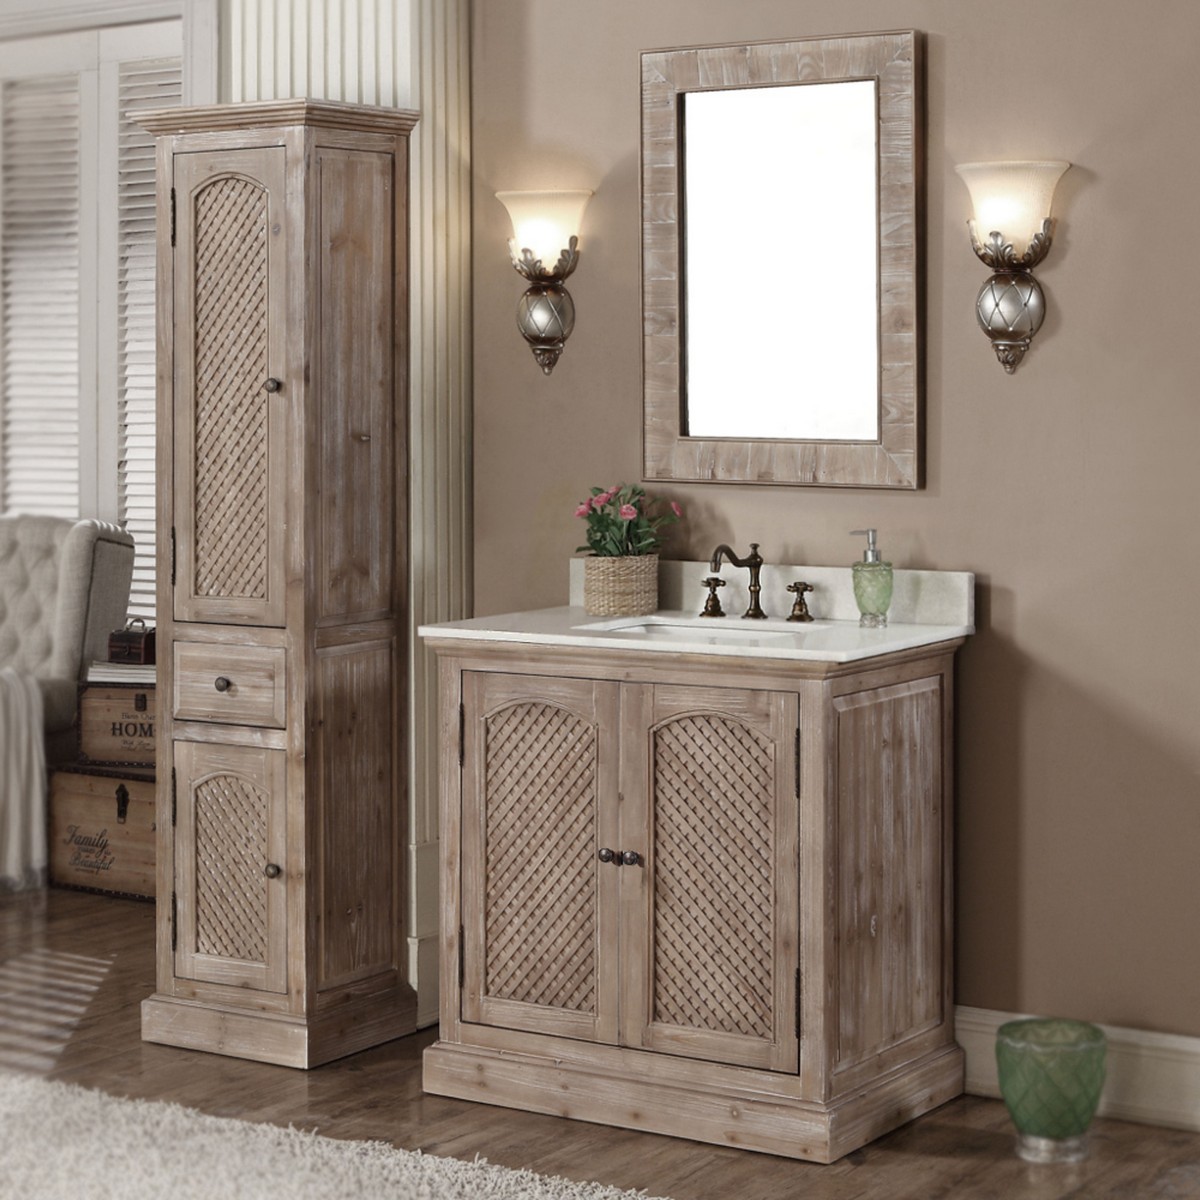 INFURNITURE WK8136+AP TOP 36 INCH SOLID RECYCLED FIR SINK VANITY WITH ARCTIC PEARL QUARTZ MARBLE TOP